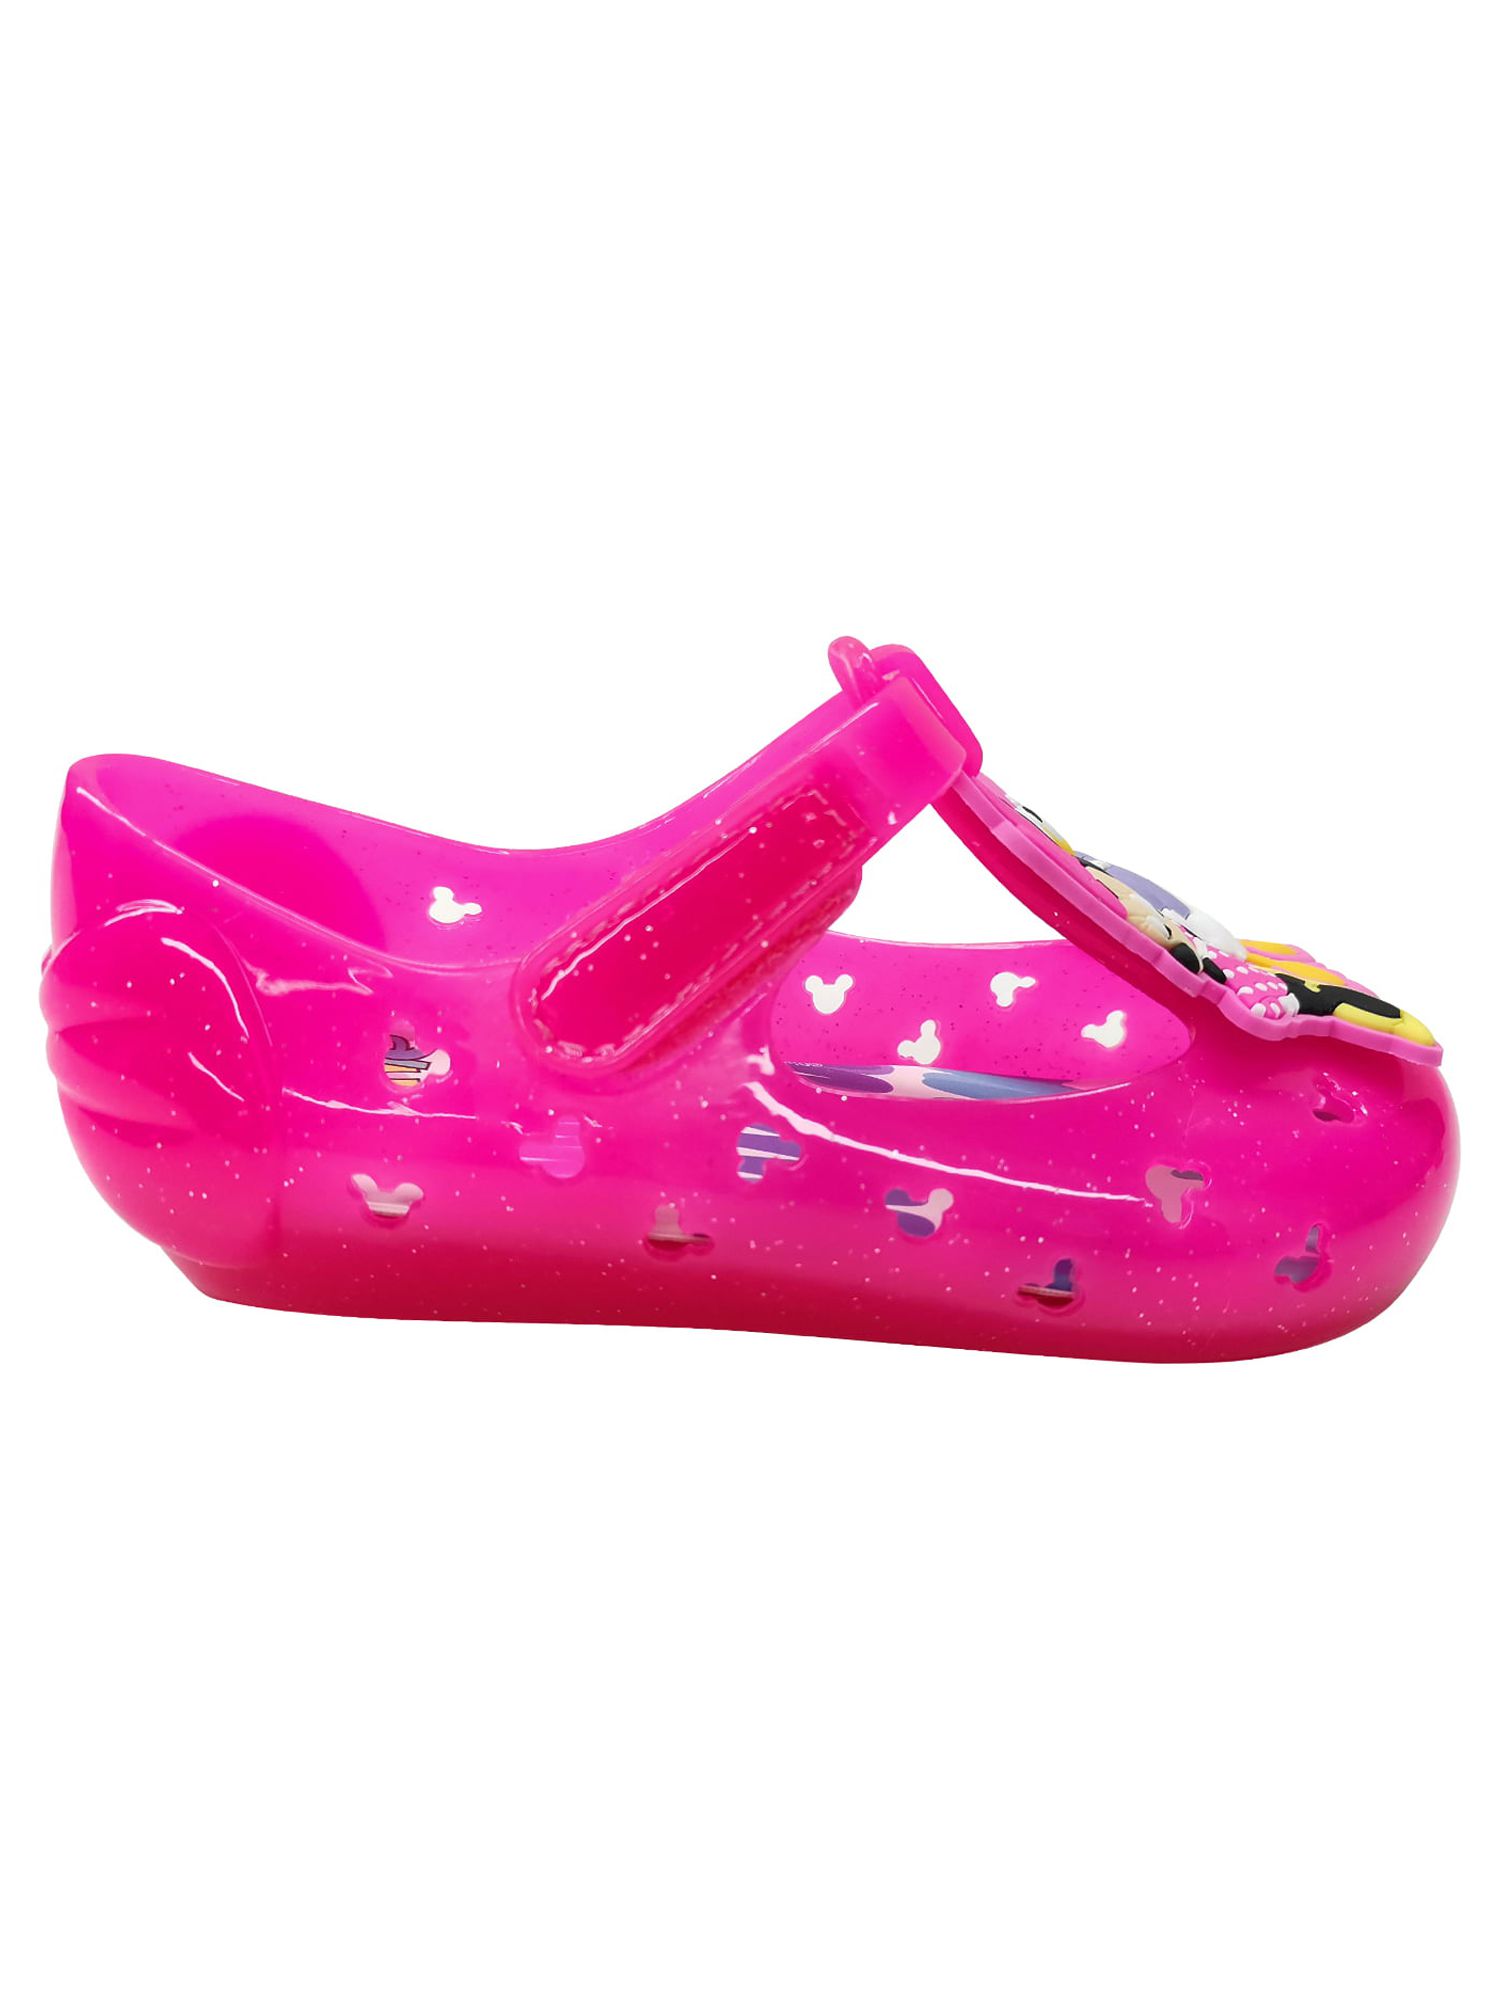 Disney Minnie Mouse & Daisy Duck BFFs Casual Jelly Shoe (Toddler Girls) - image 2 of 7